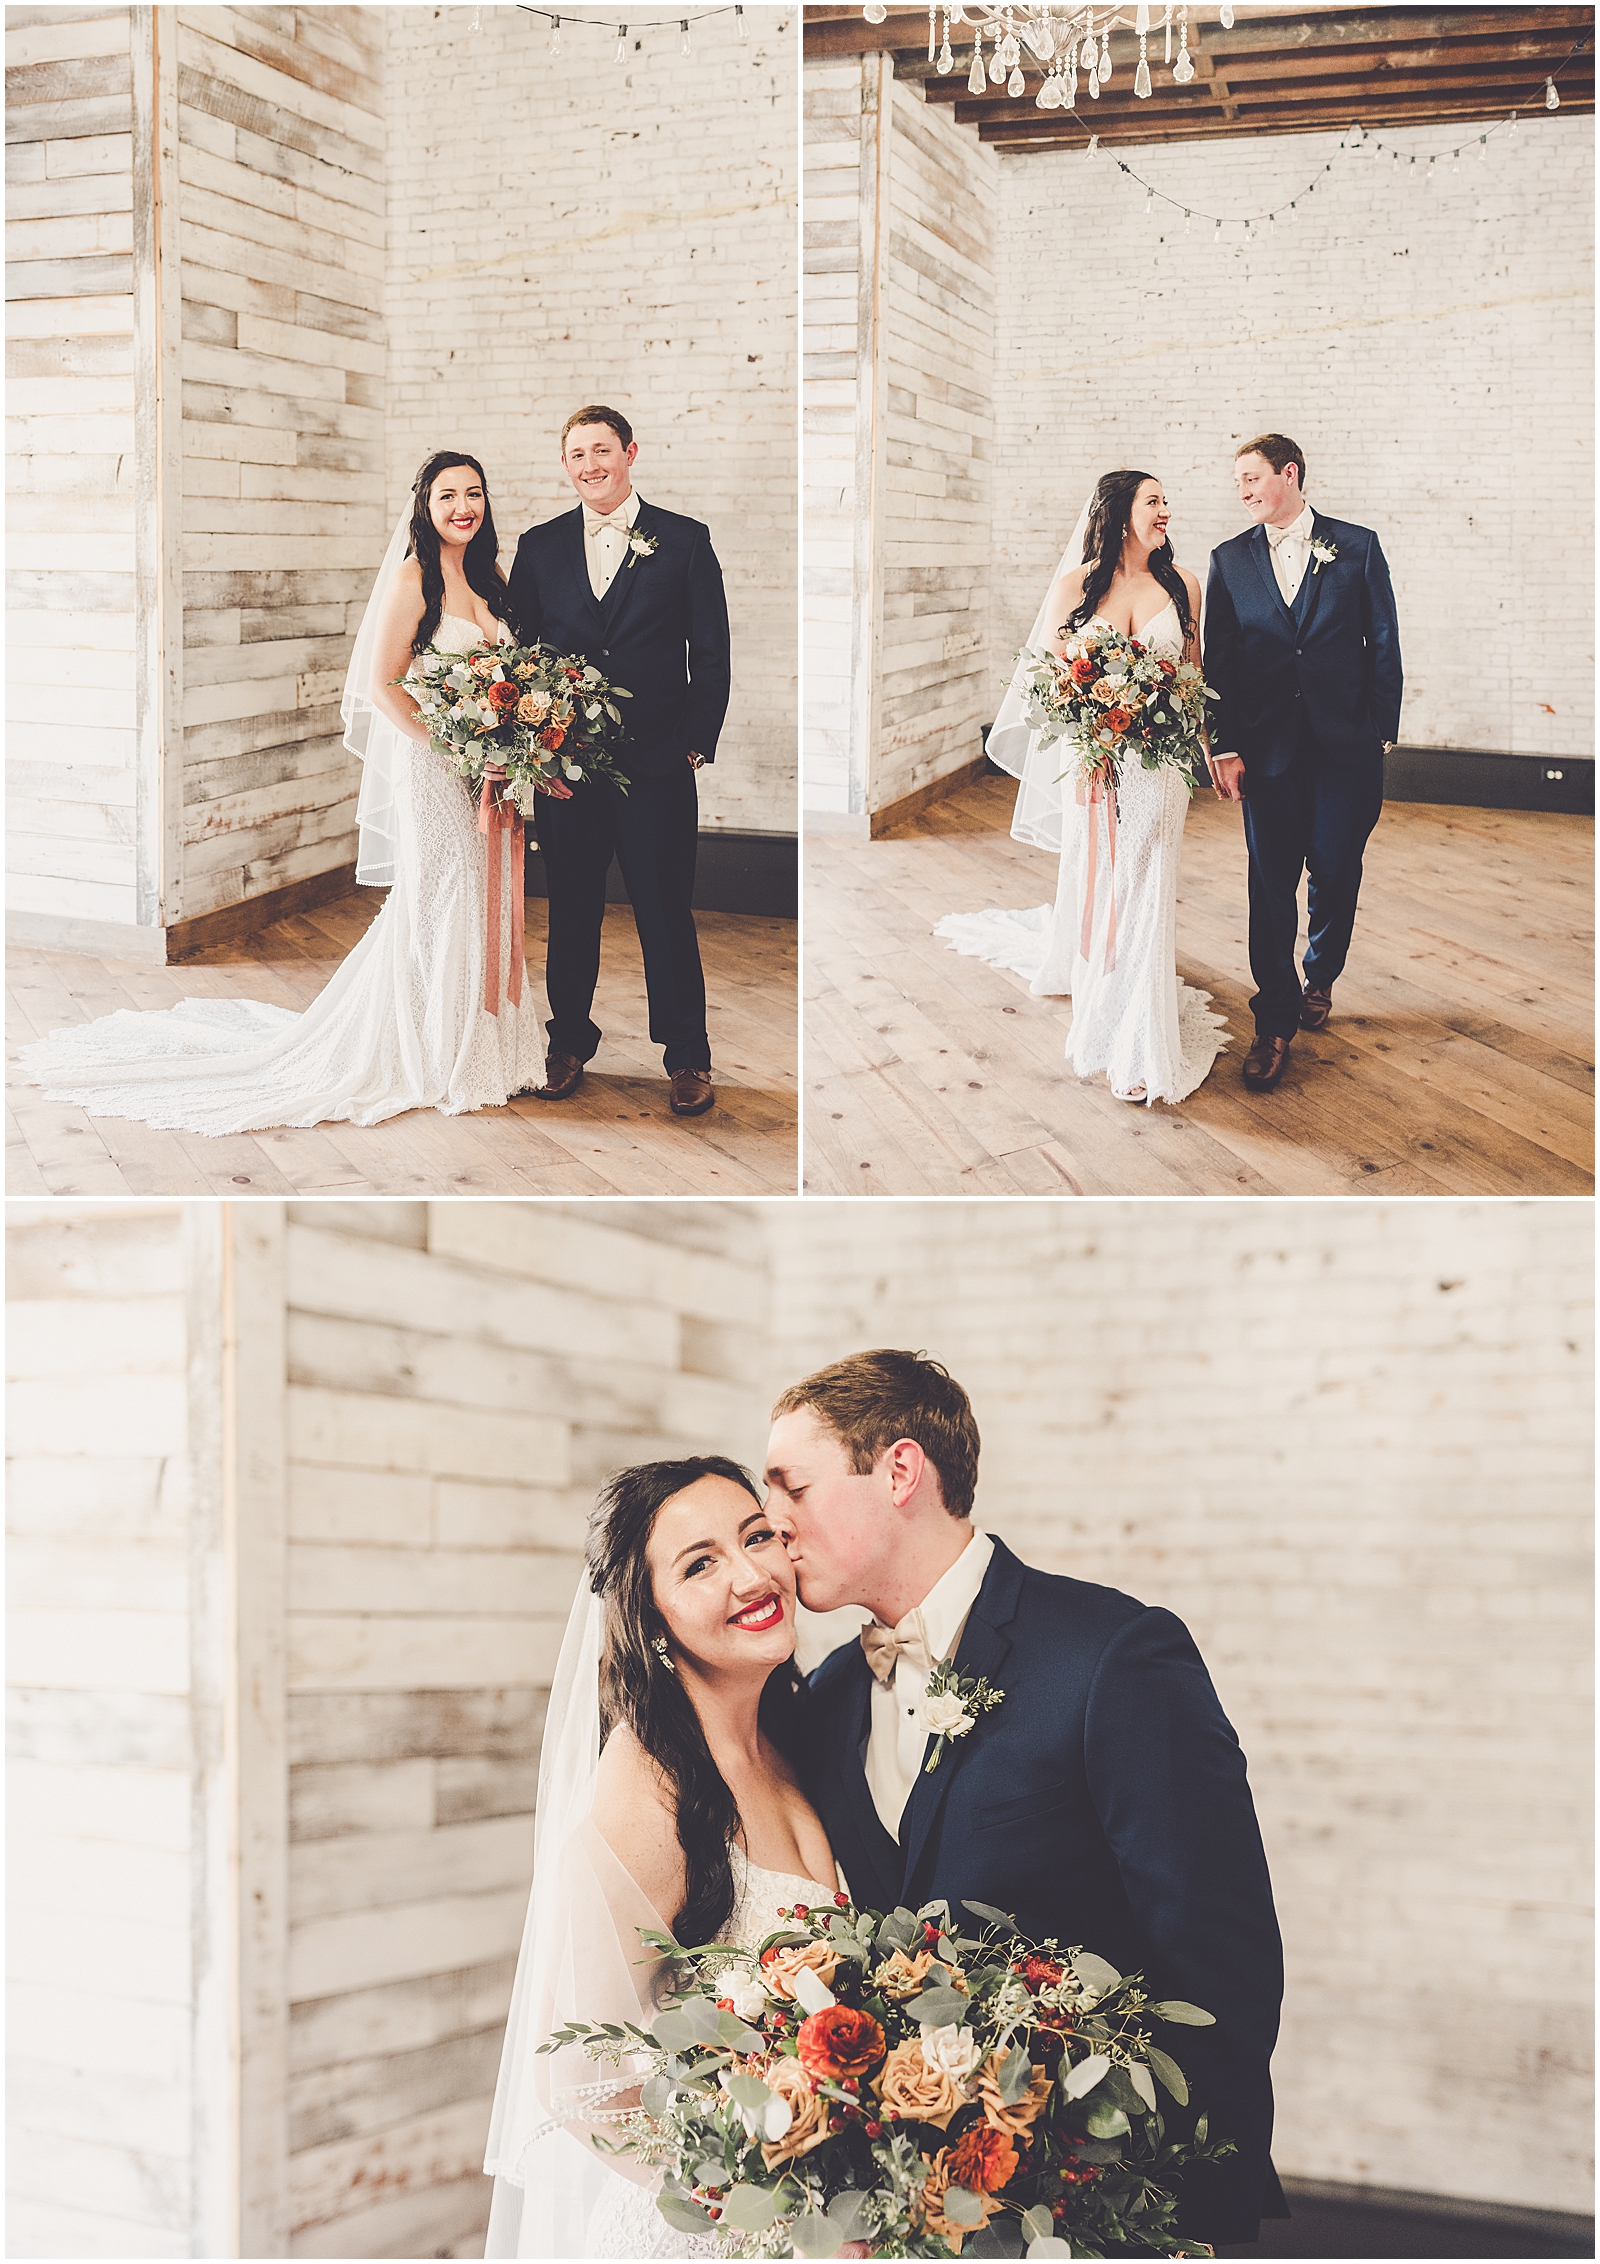 Kylie and Noah's fall wedding at Town & Country Events in Milford, Illinois with Chicagoland wedding photographer Kara Evans Photographer.